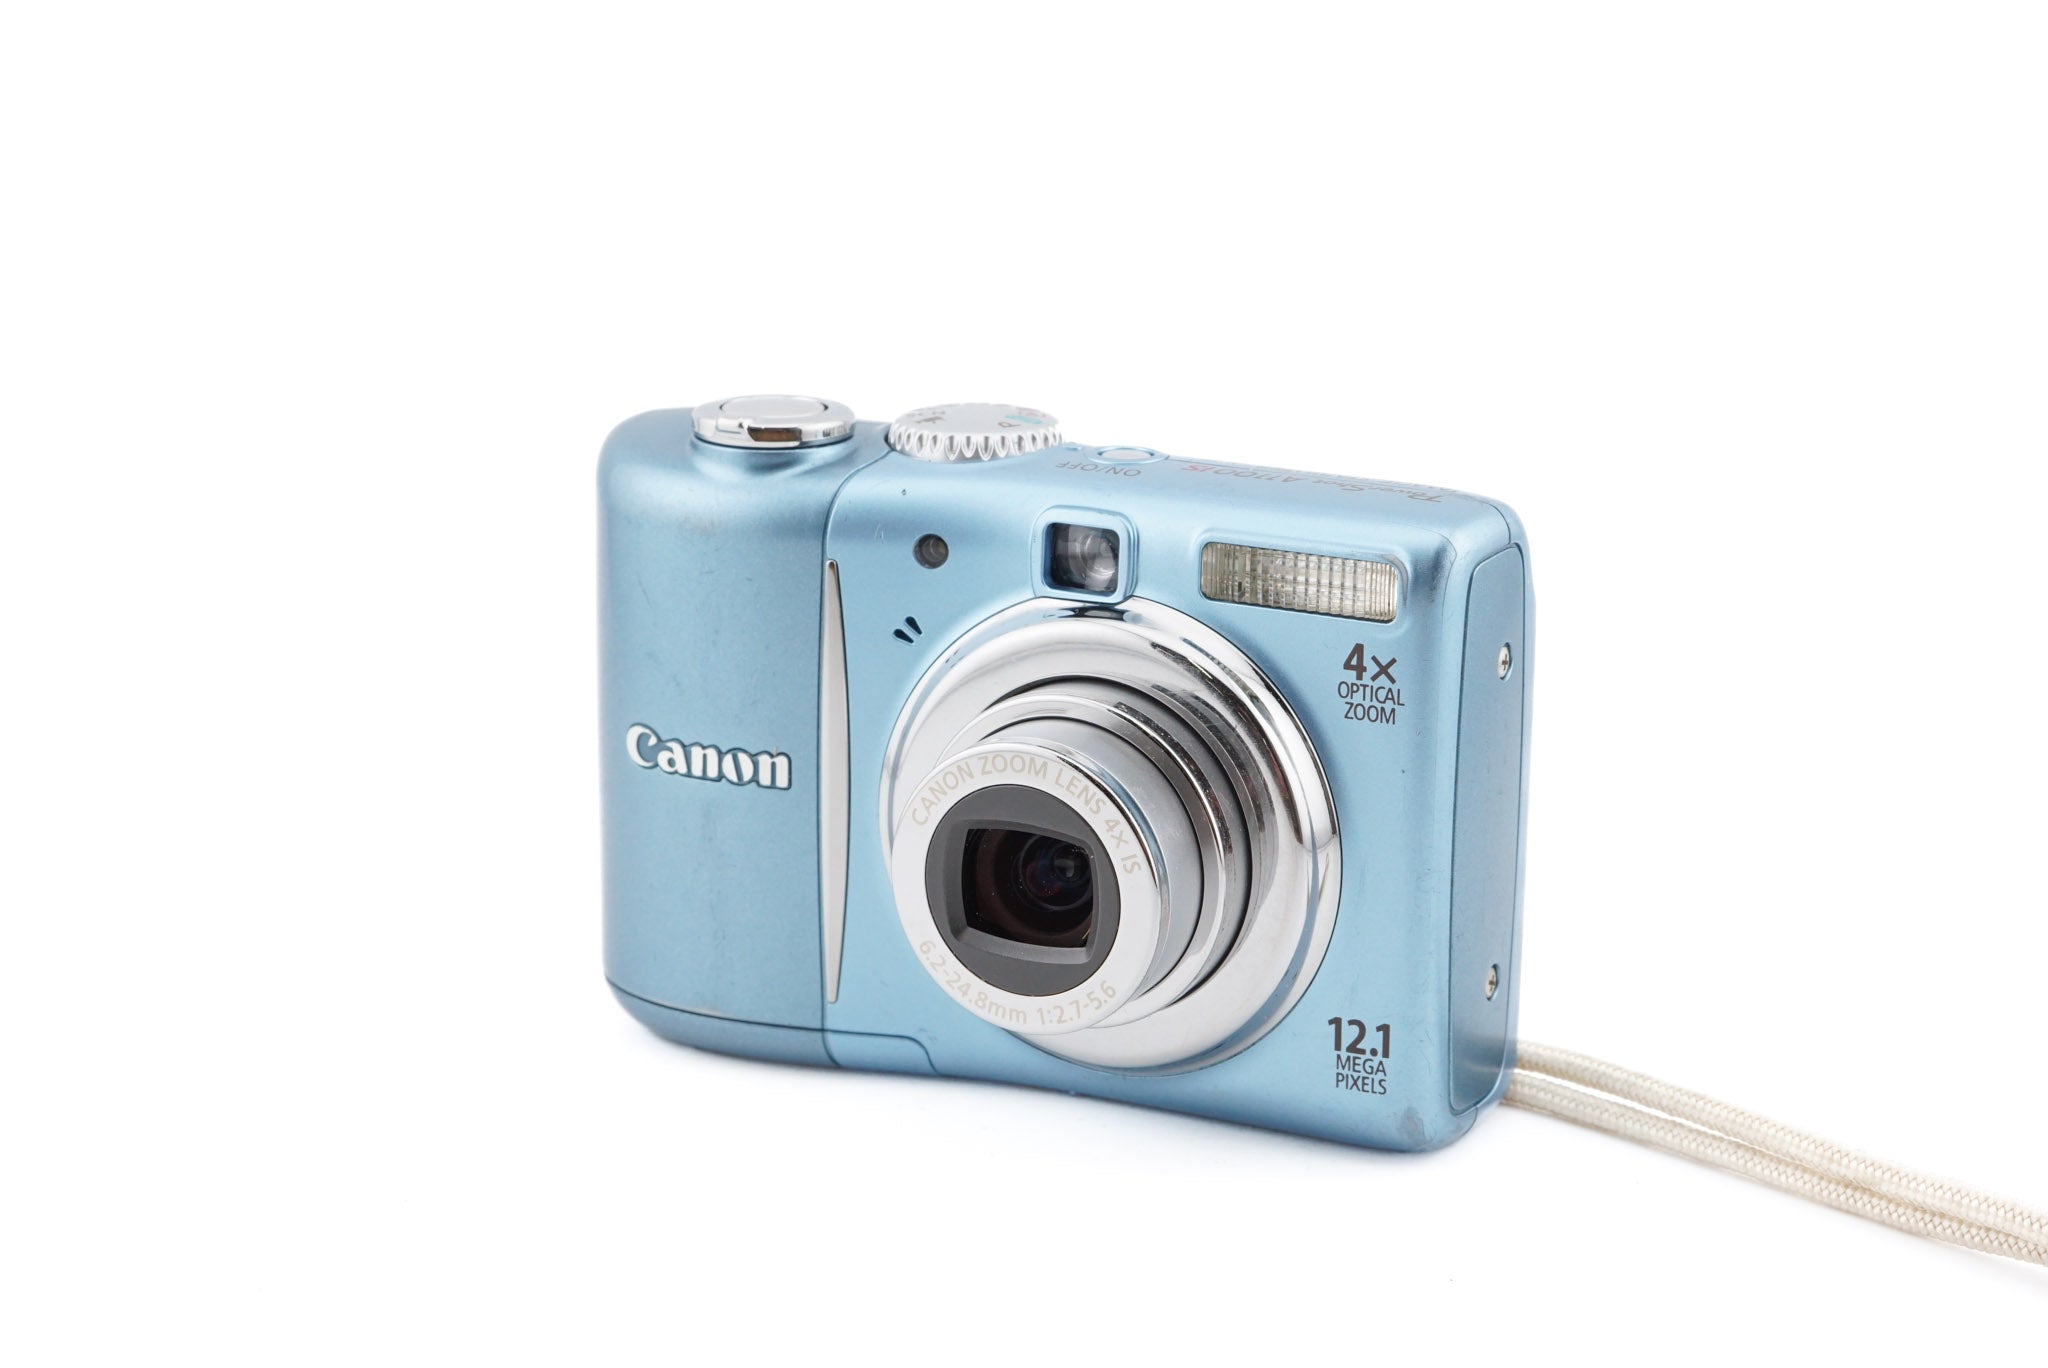 Canon PowerShot A1100 IS specifications